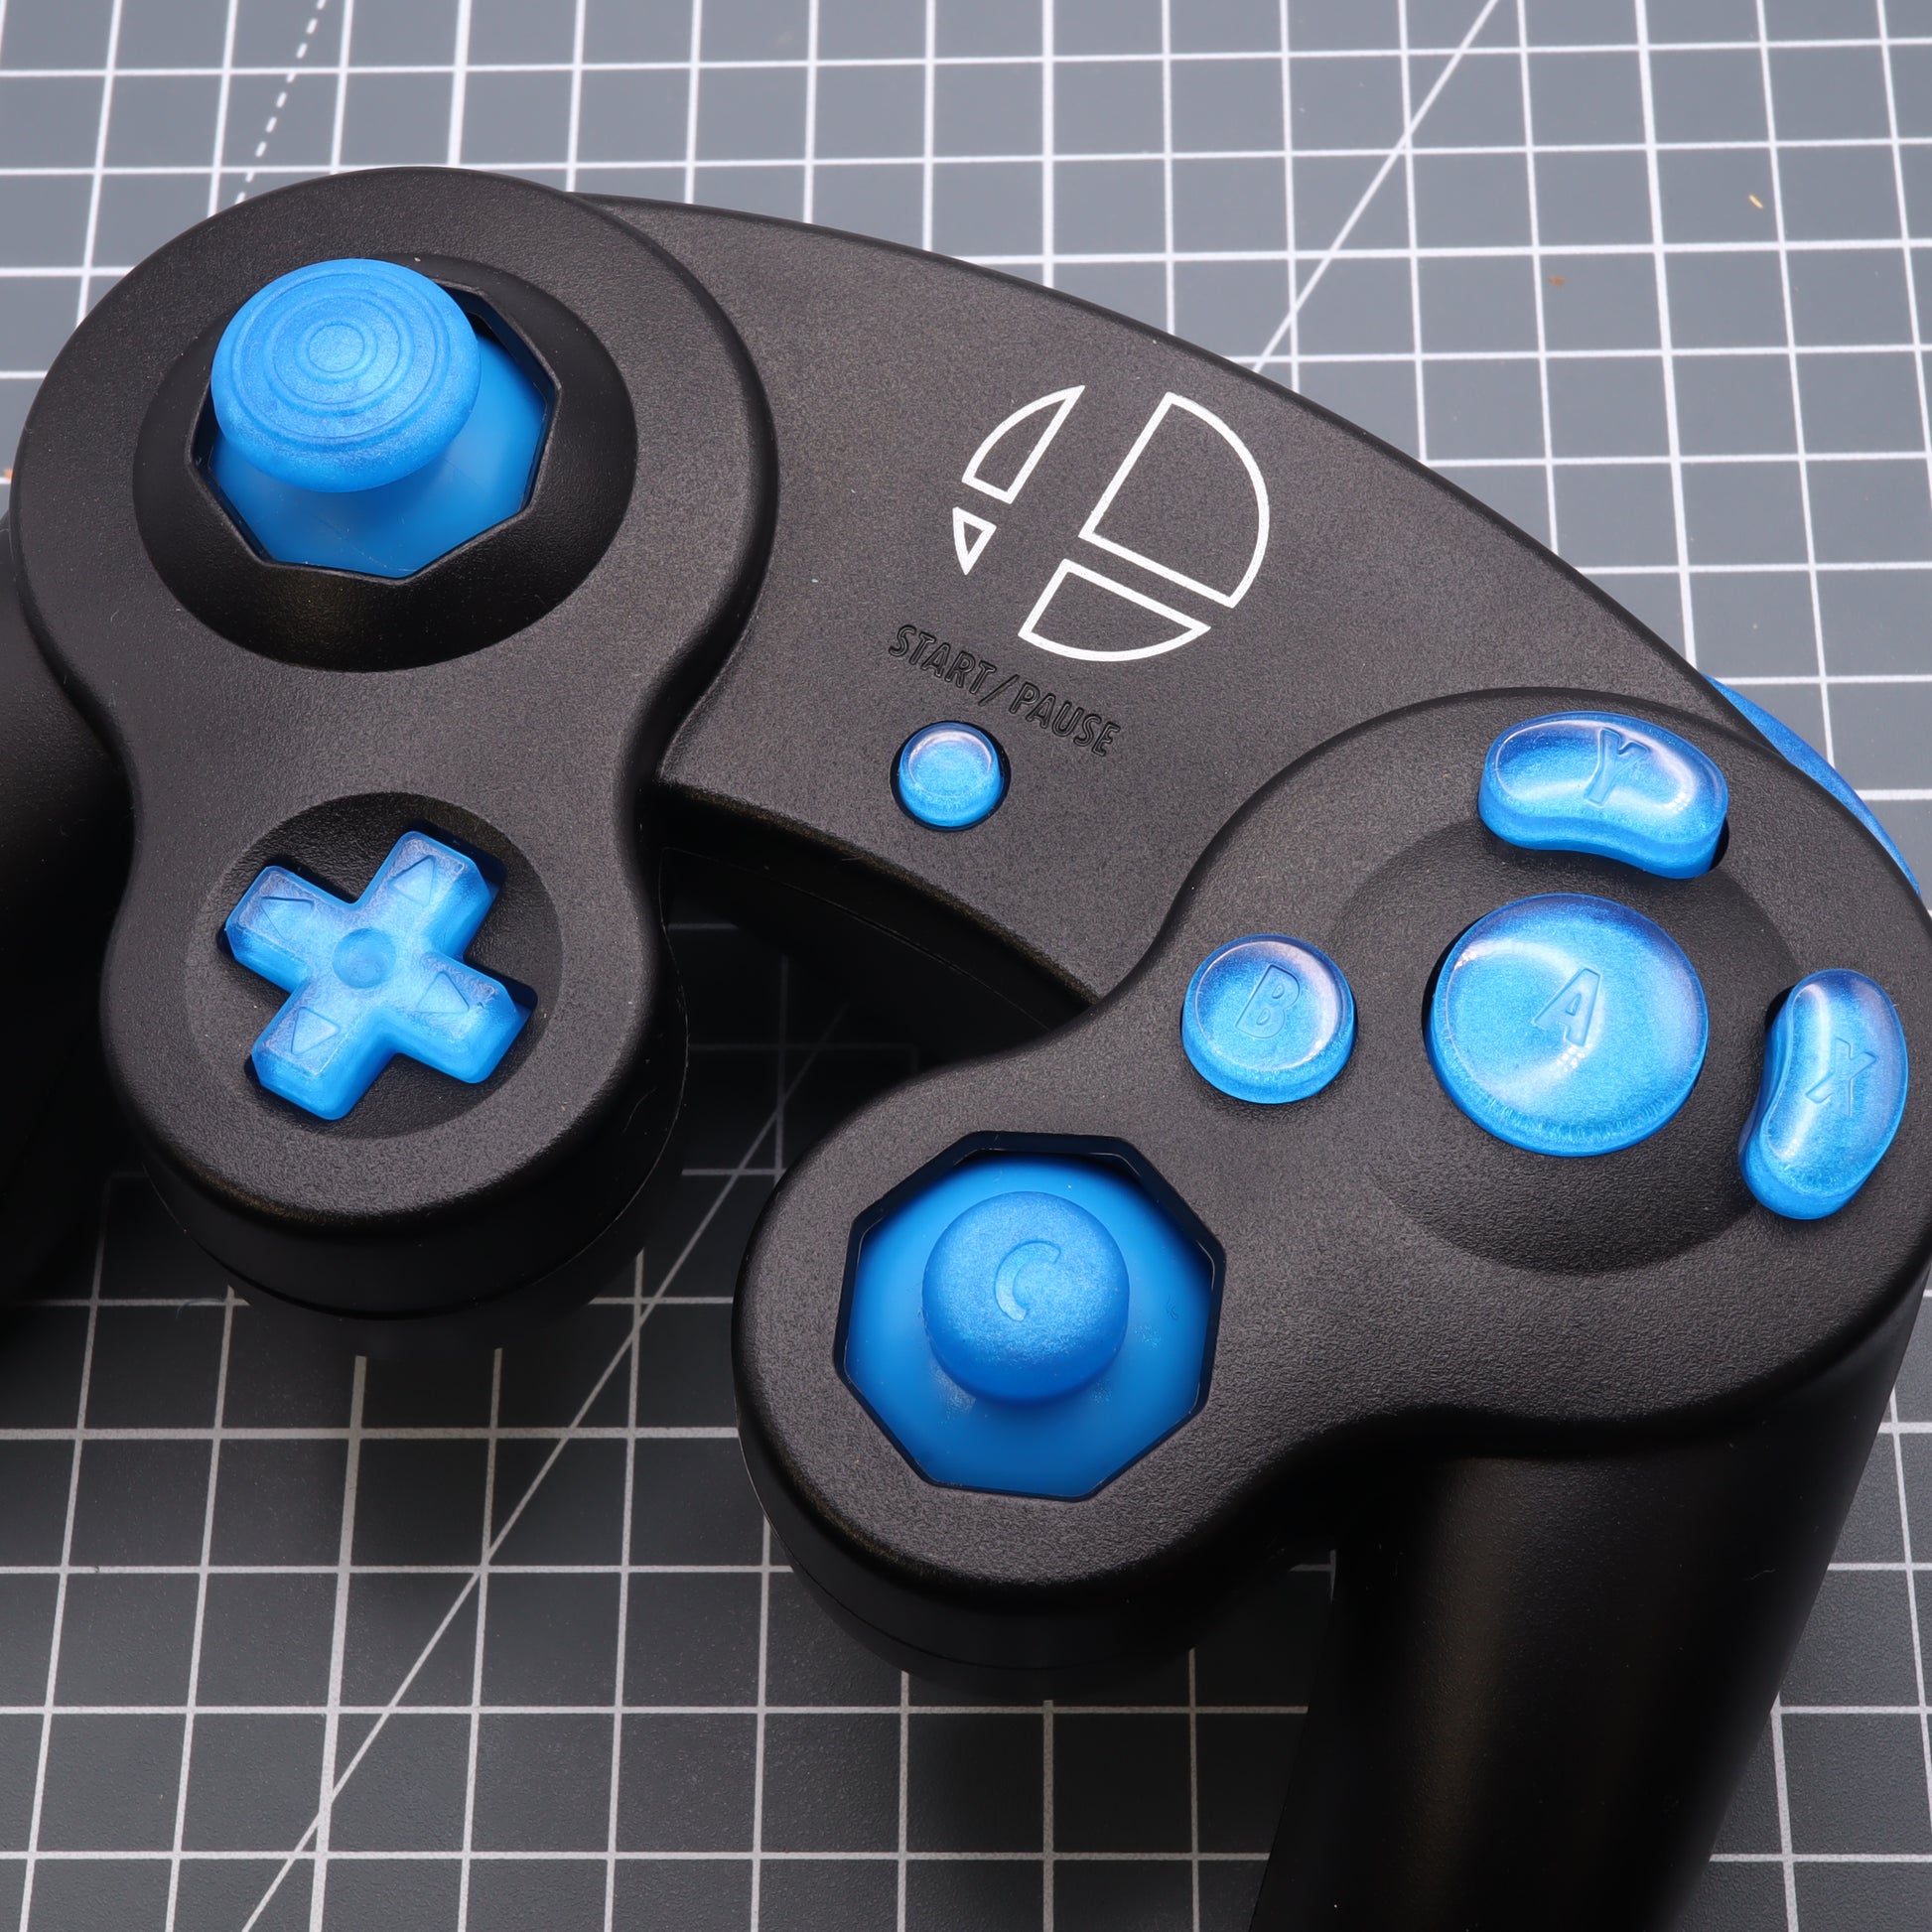 Black and blue game controller with custom-cast GameCube - Custom Button - Blueberry Candy buttons on a grid surface.